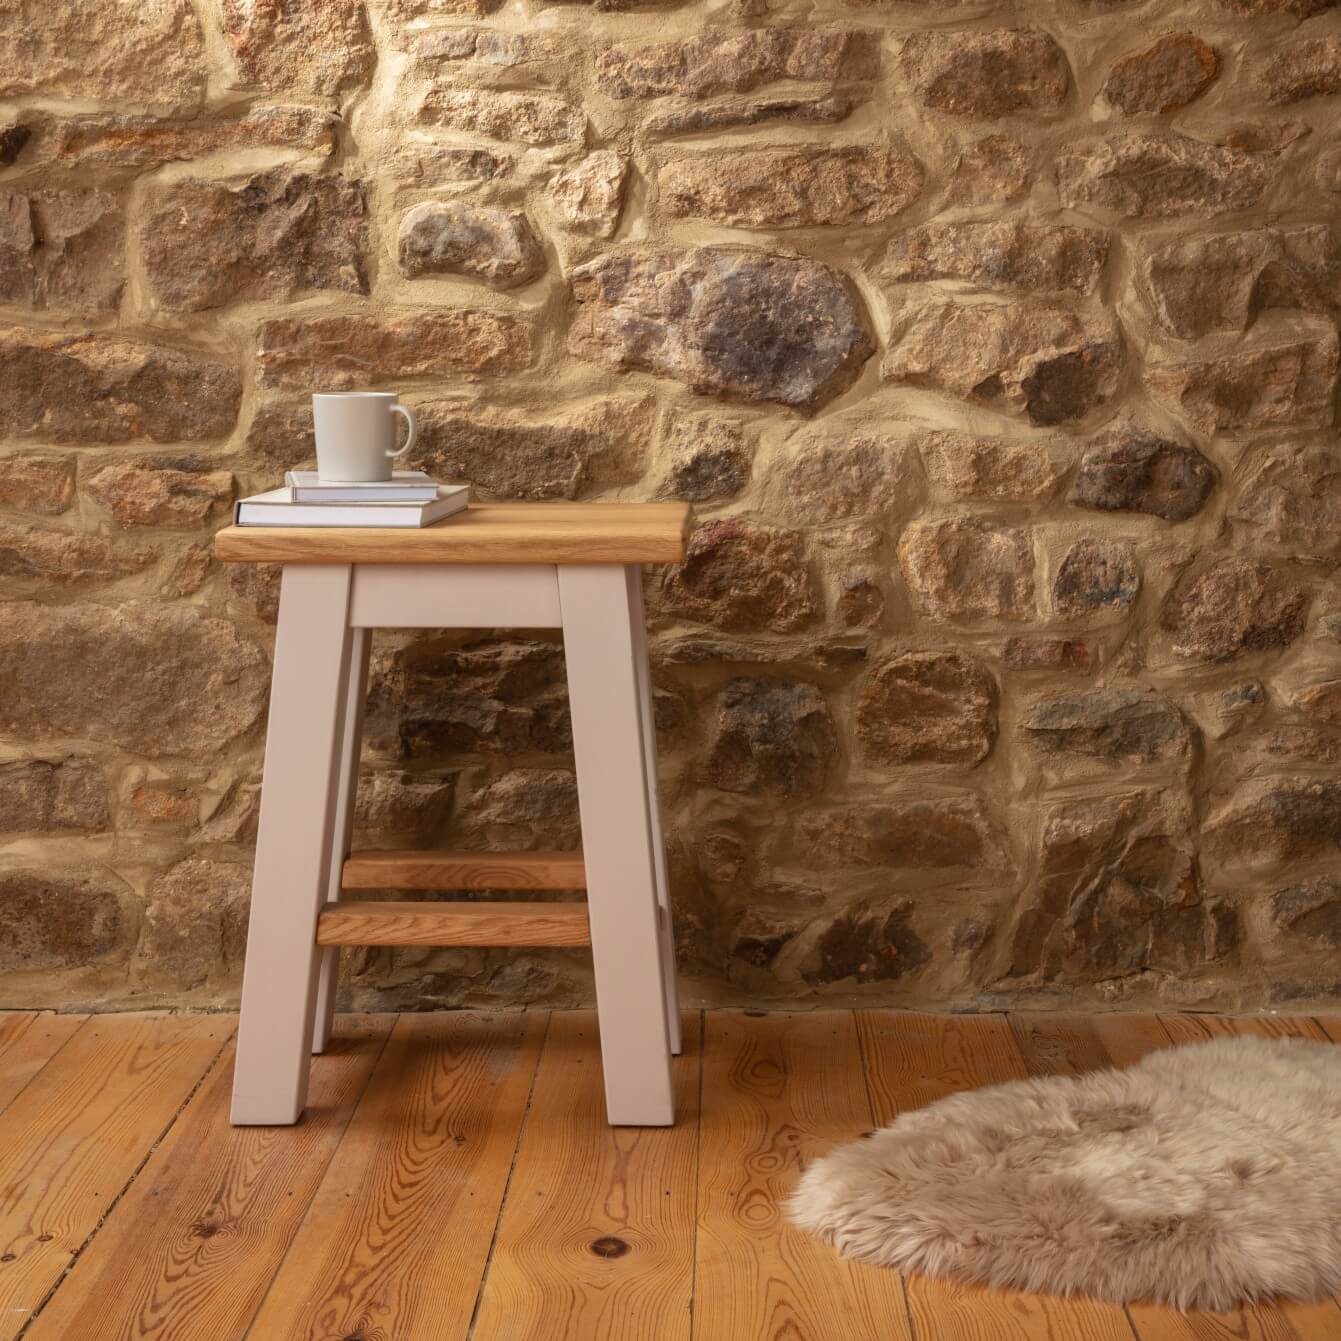 Image of Langley Oak Bar Stool made in the UK by Funky Chunky Furniture. Buying this product supports a UK business, jobs and the local community